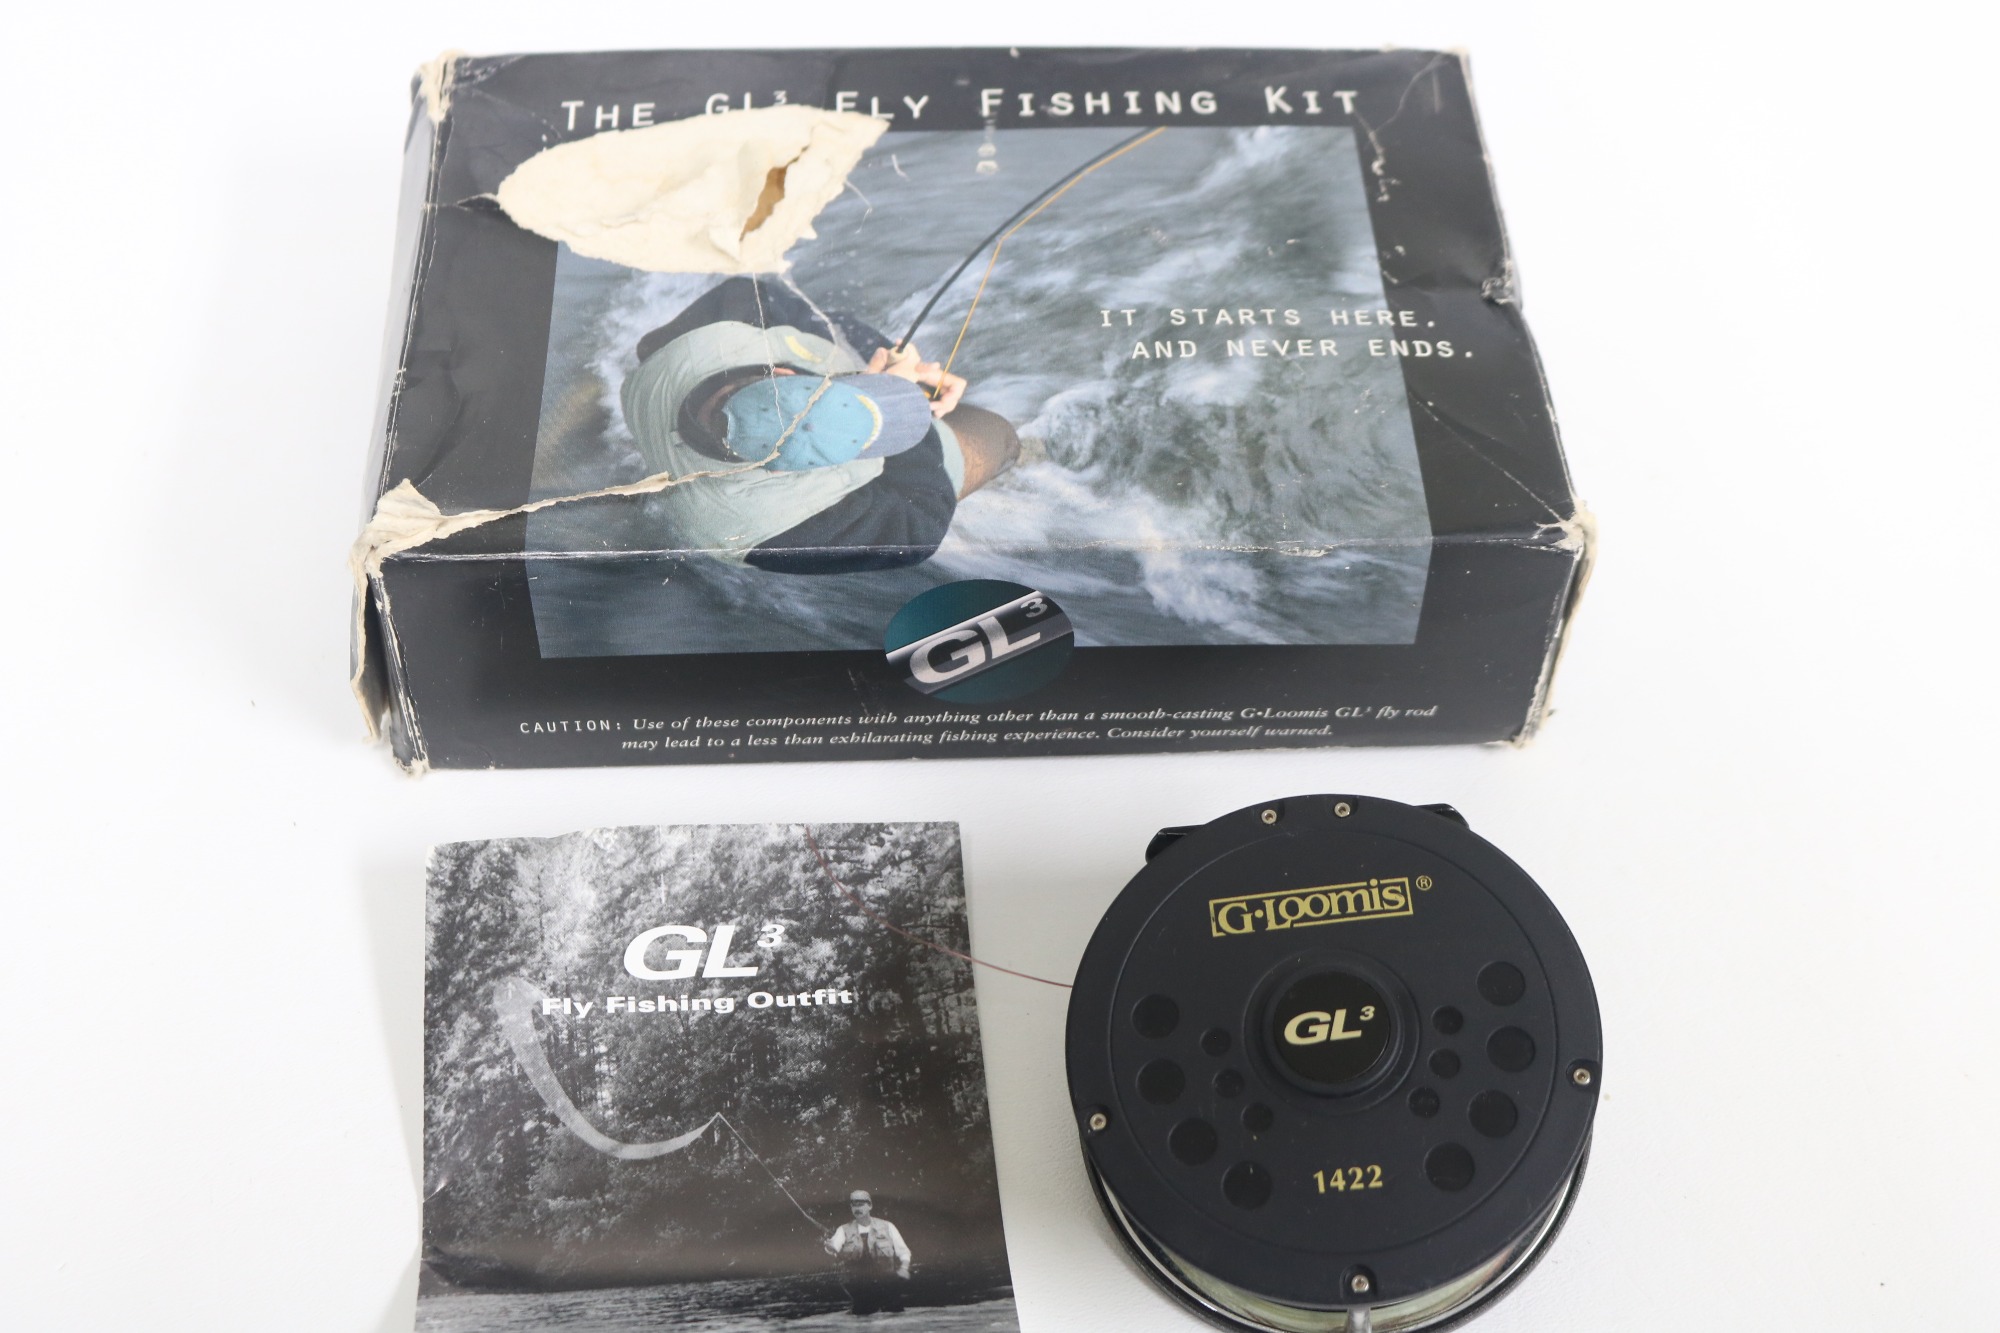 G. Loomis GL3 1422 Fly Reel Rare Collectible ca. 1994 - Excellent